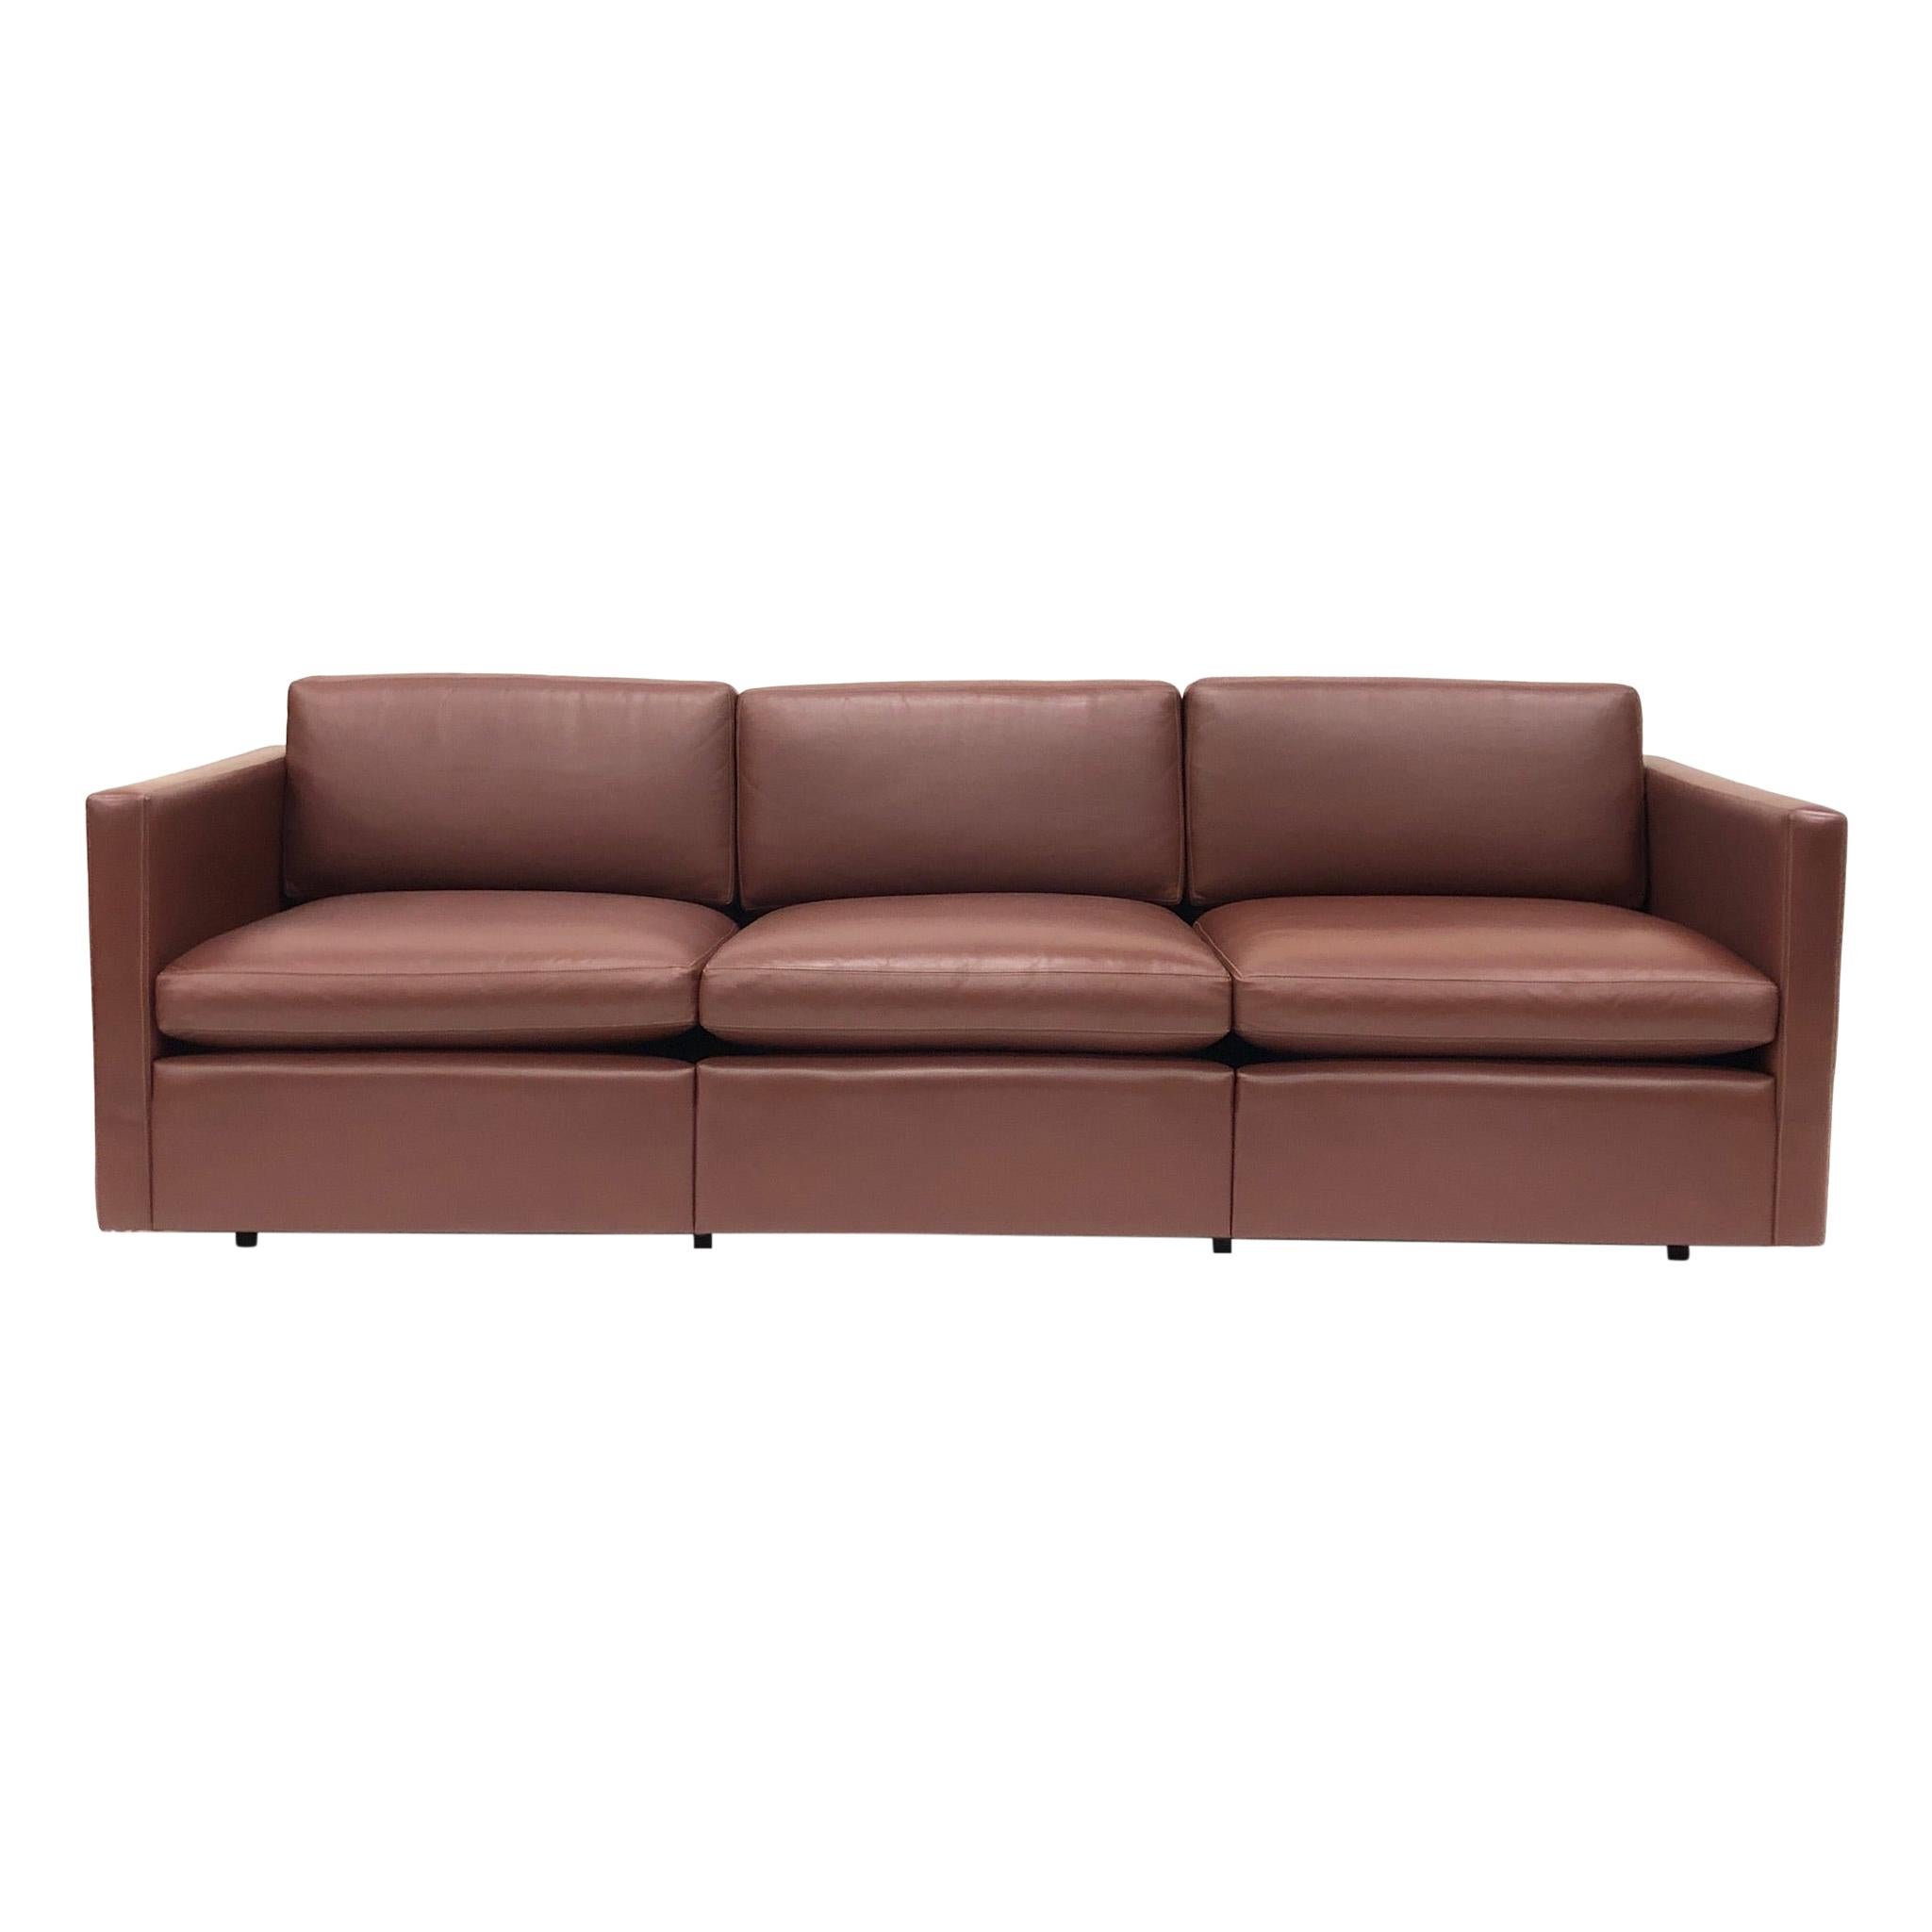 Burgundy Leather Sofa by Charles Pfister for Knoll